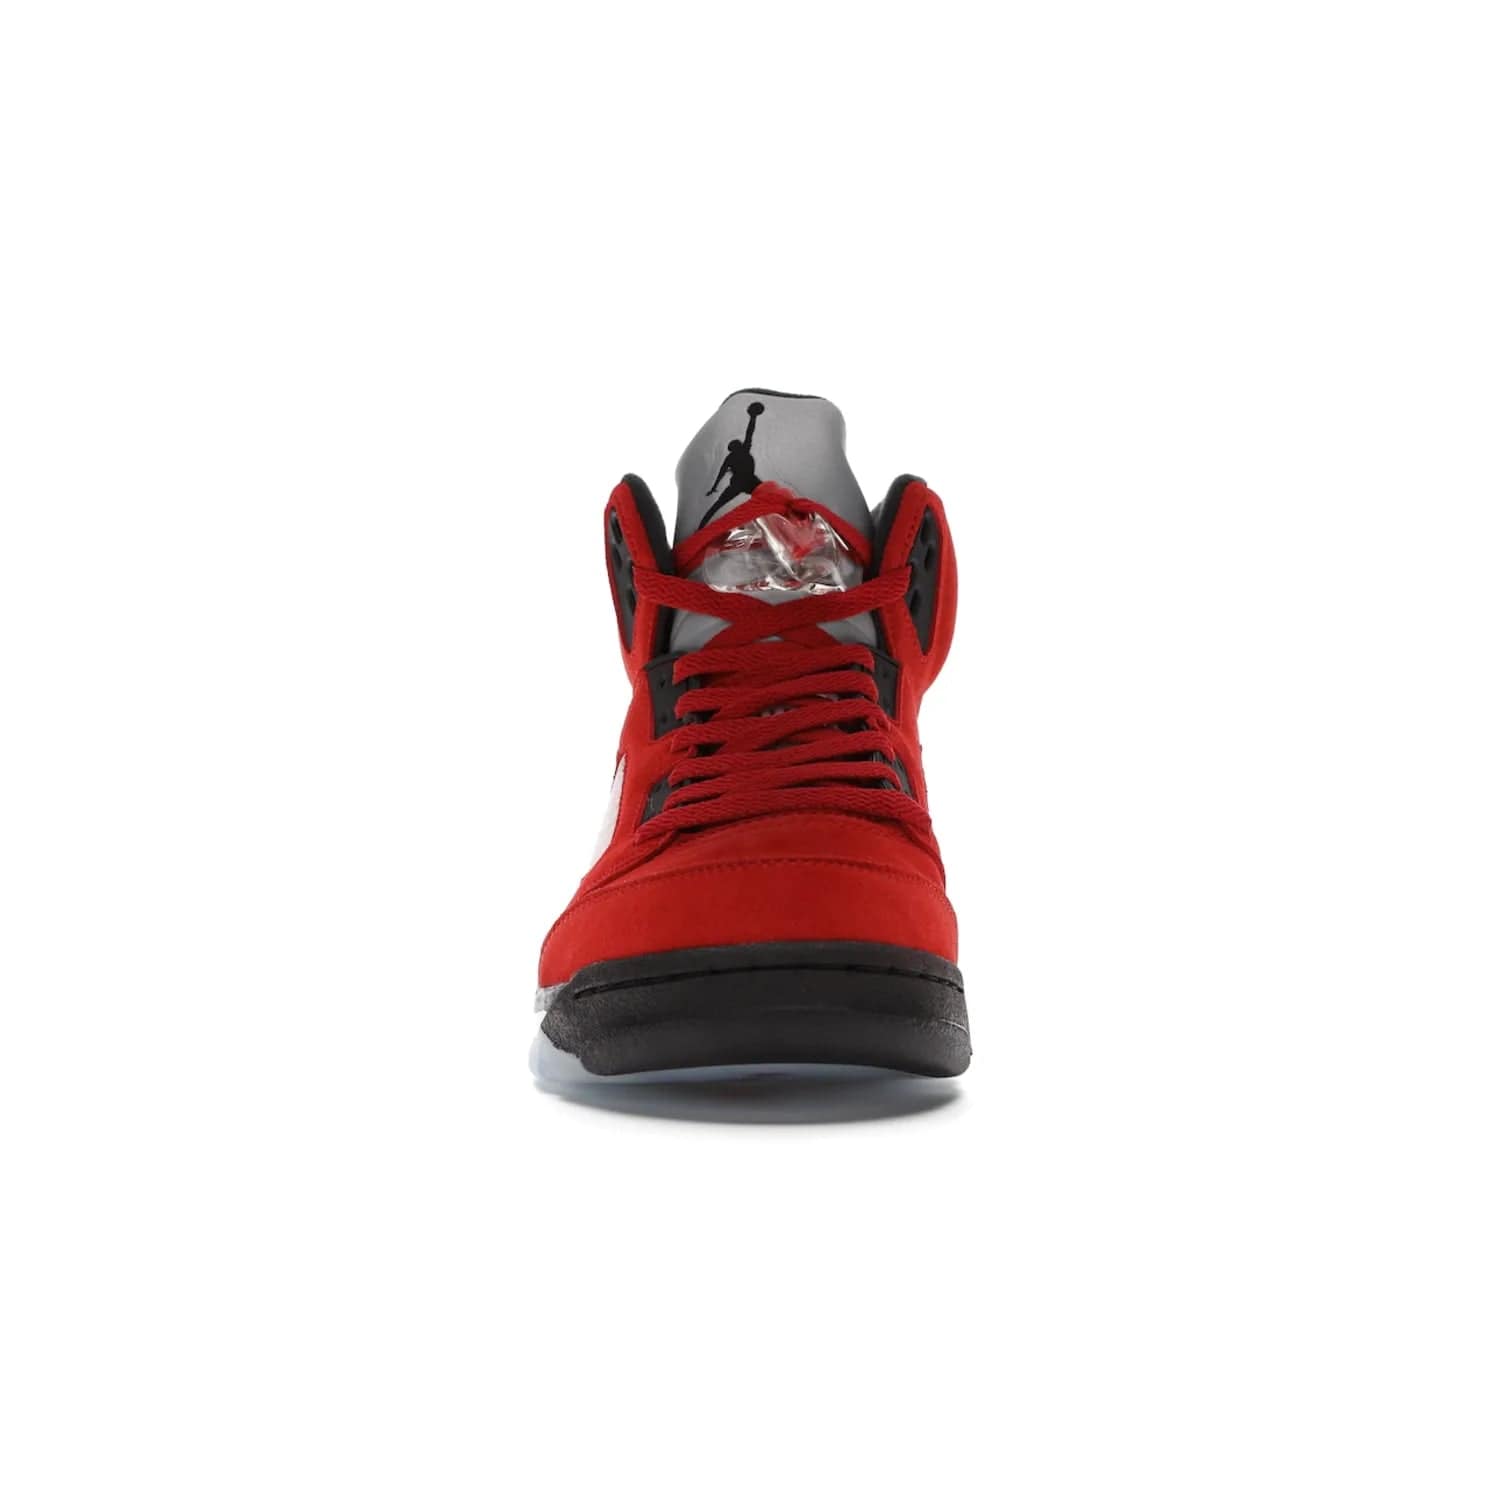 Jordan 5 Retro Raging Bull Red (2021) - Image 10 - Only at www.BallersClubKickz.com - Get ready for the 2021 stand-alone release of the Air Jordan 5 Raging Bulls! This all-suede upper combines luxe details like a Jumpman logo, red & black "23" embroidery and shark tooth detailing, atop a black midsole. Don't miss out - release date in April 2021 for $190.